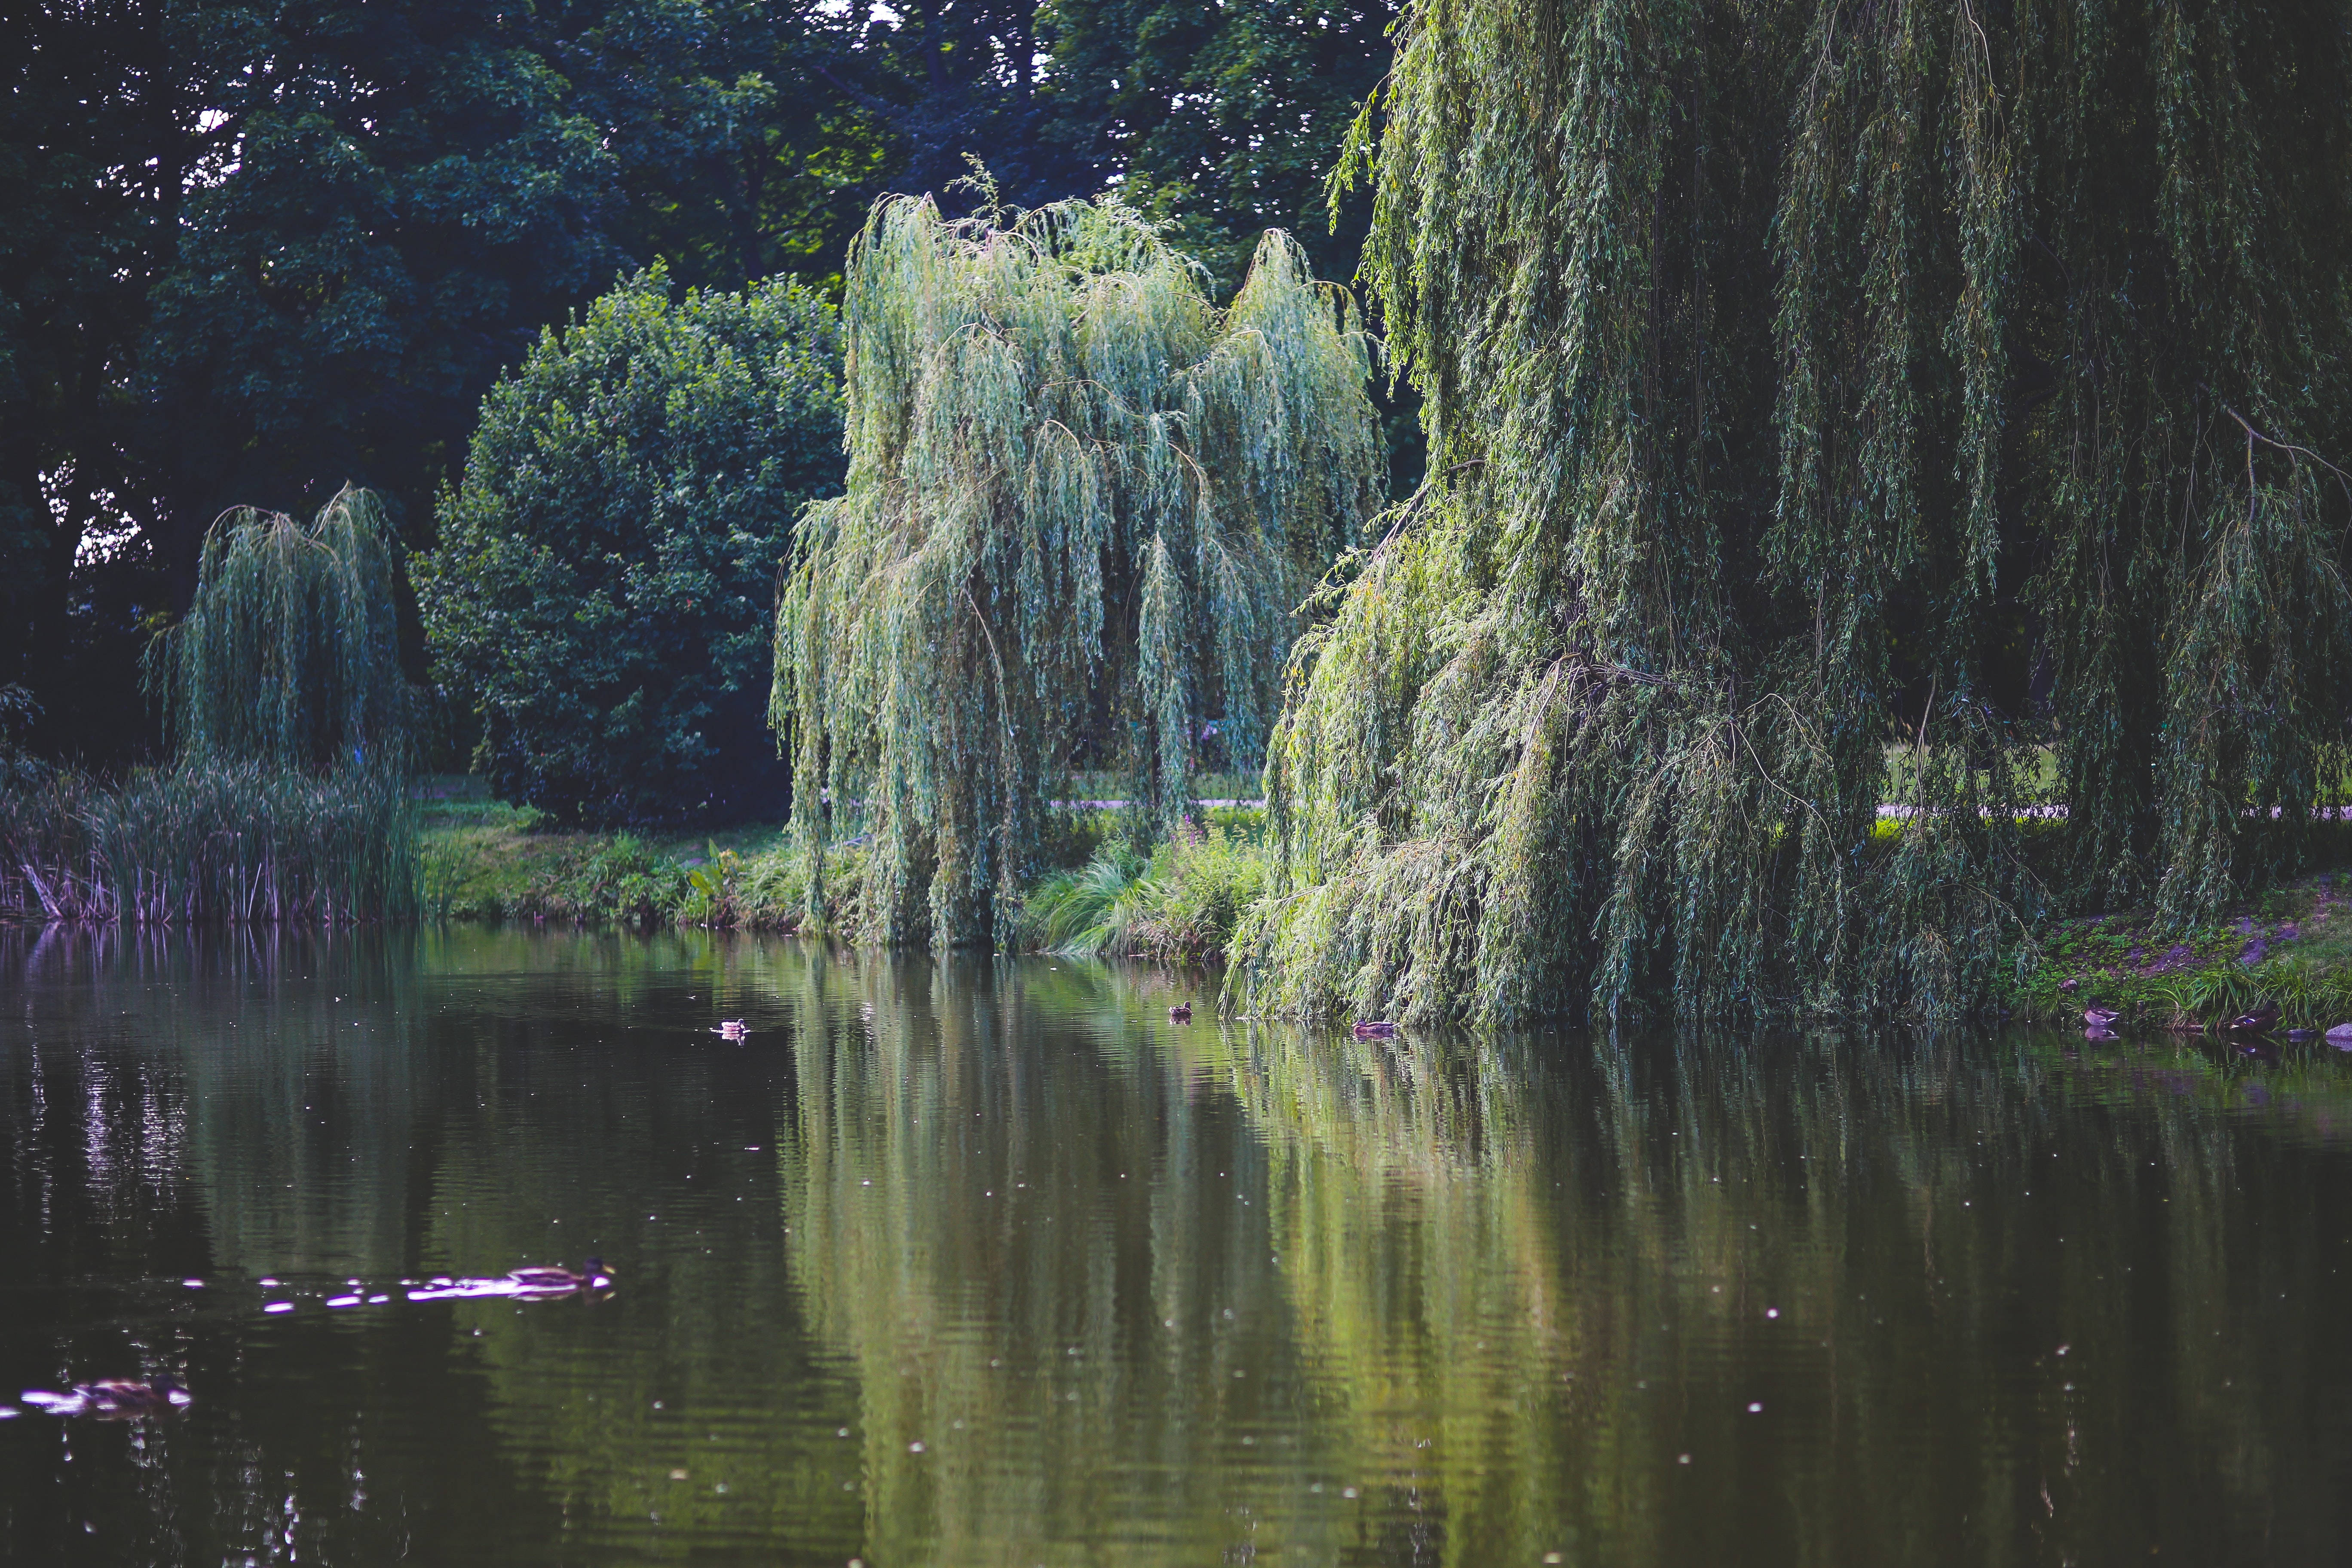 Willow that grow along the river, Beautiful, Pool, Willow, Waterside, HQ Photo